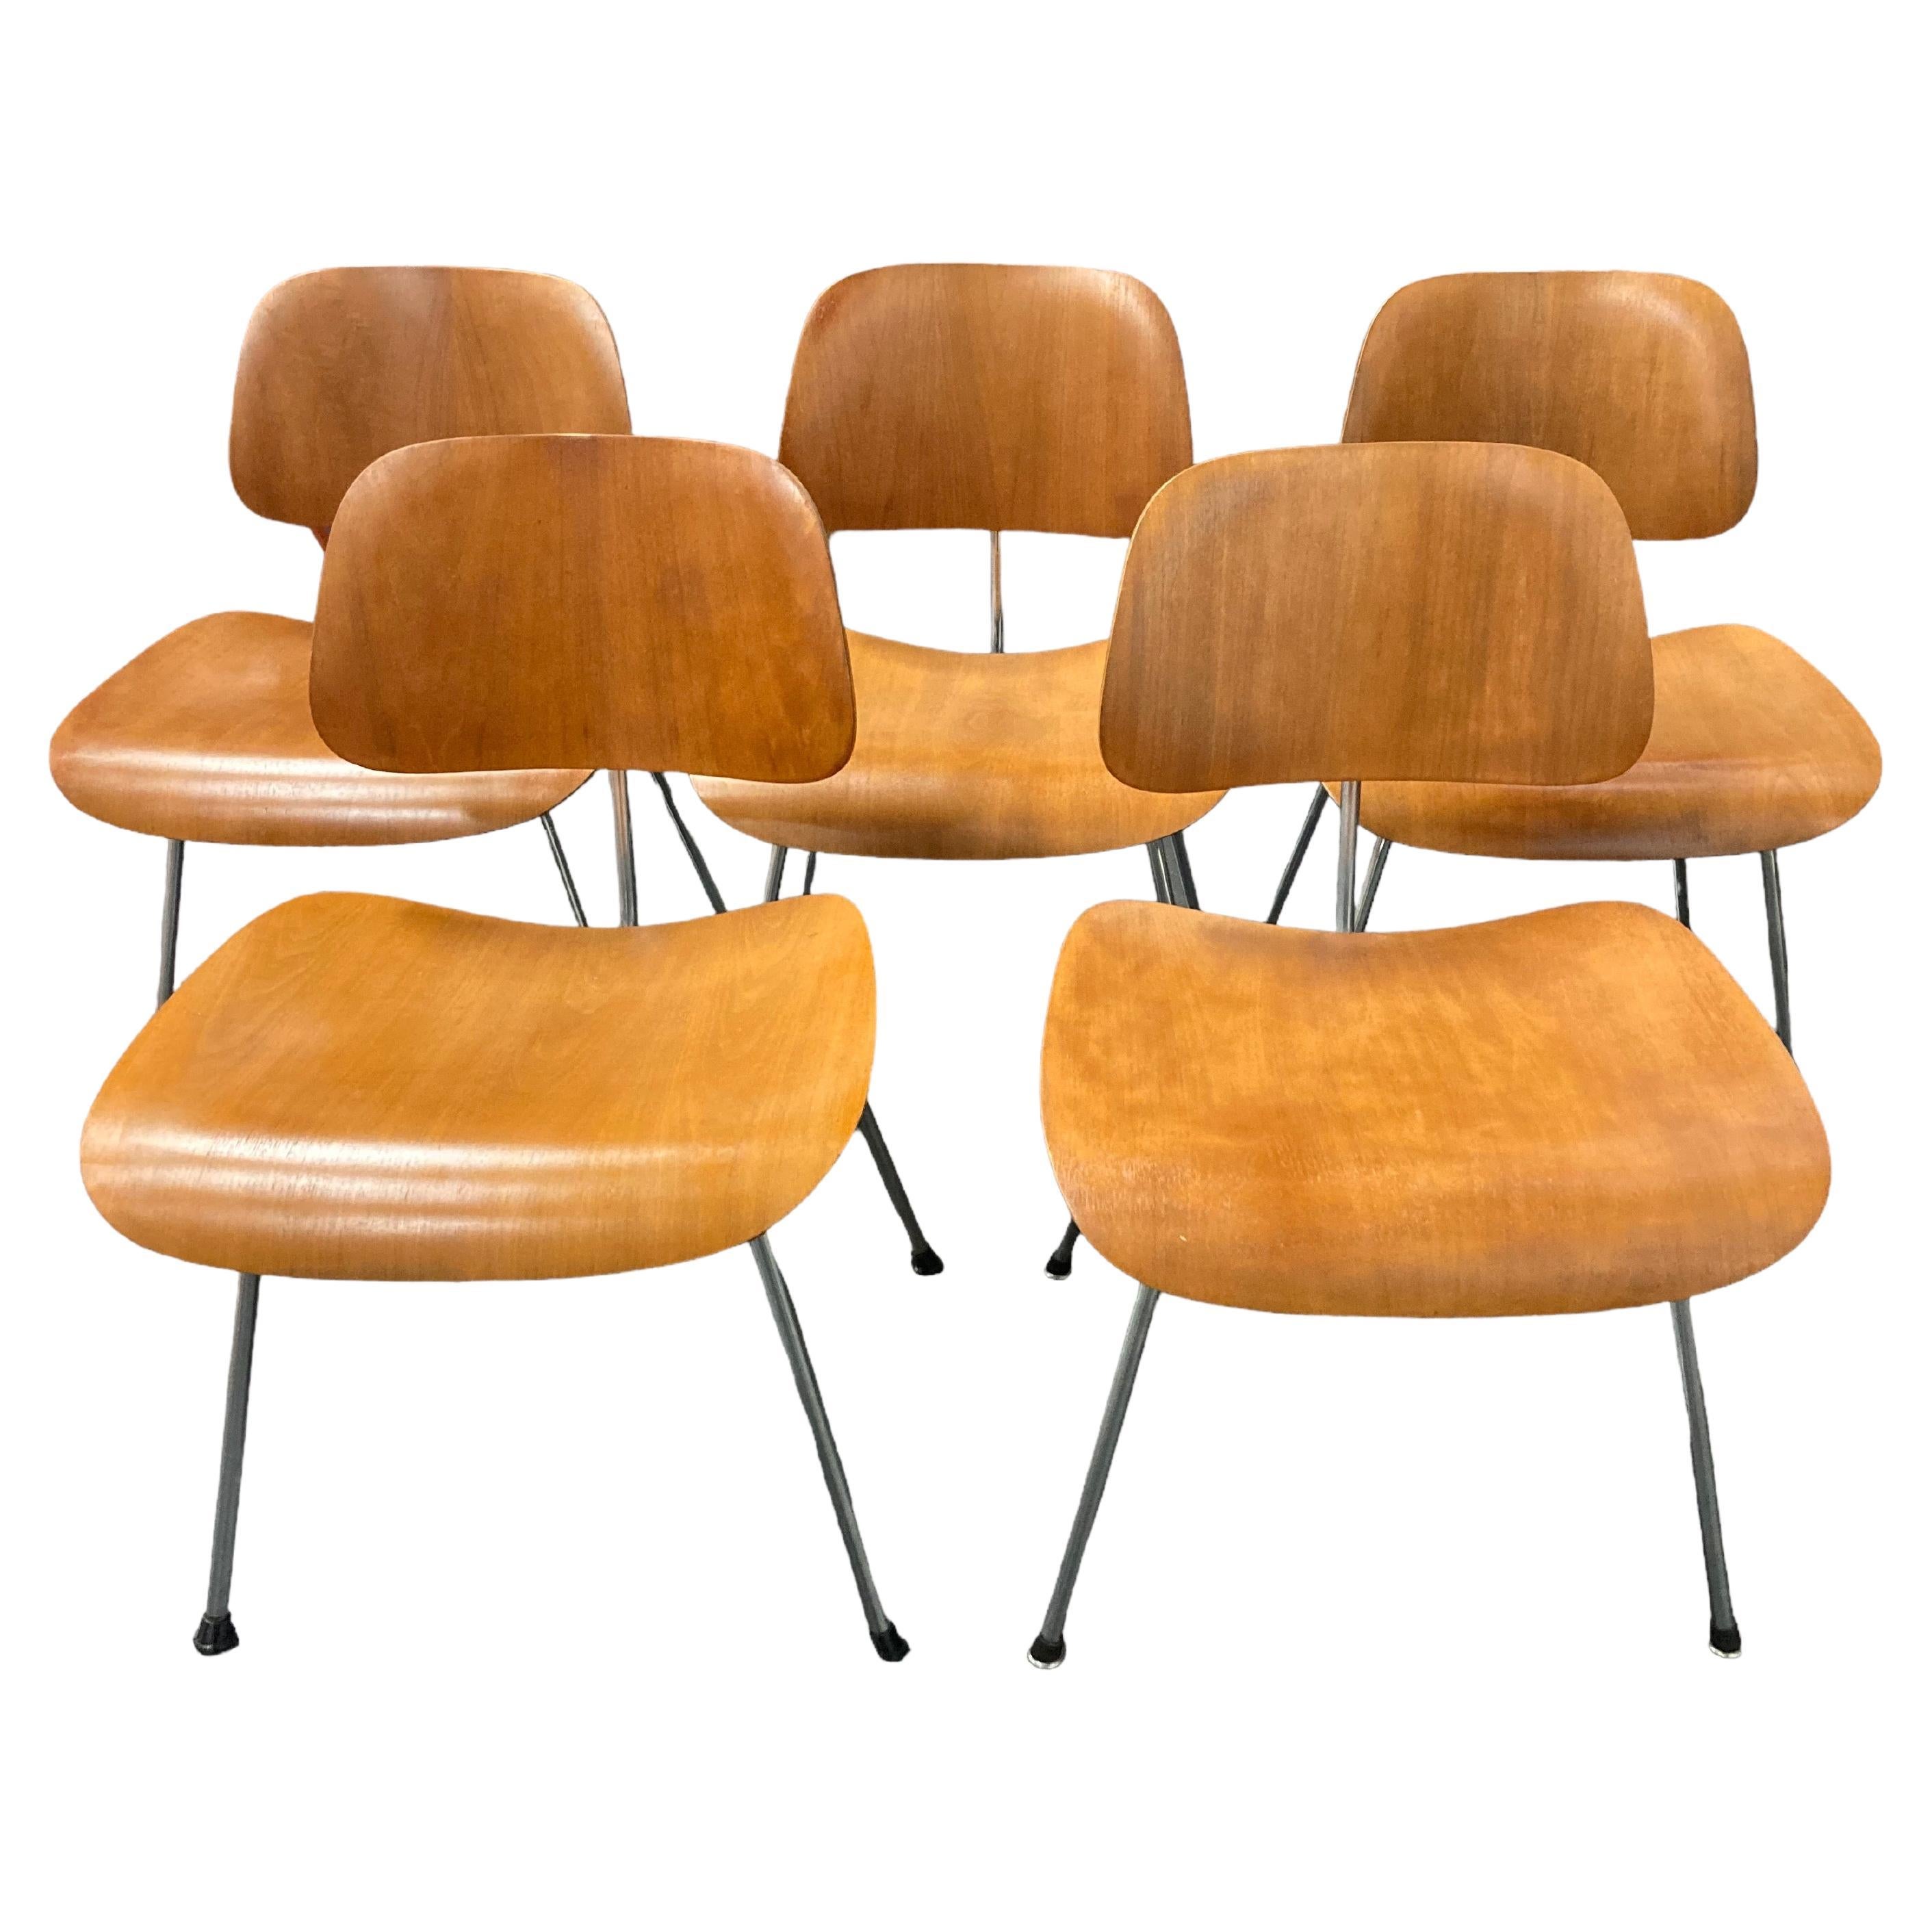 Herman Miller Charles & Ray Eames LCM Chair Set of 5